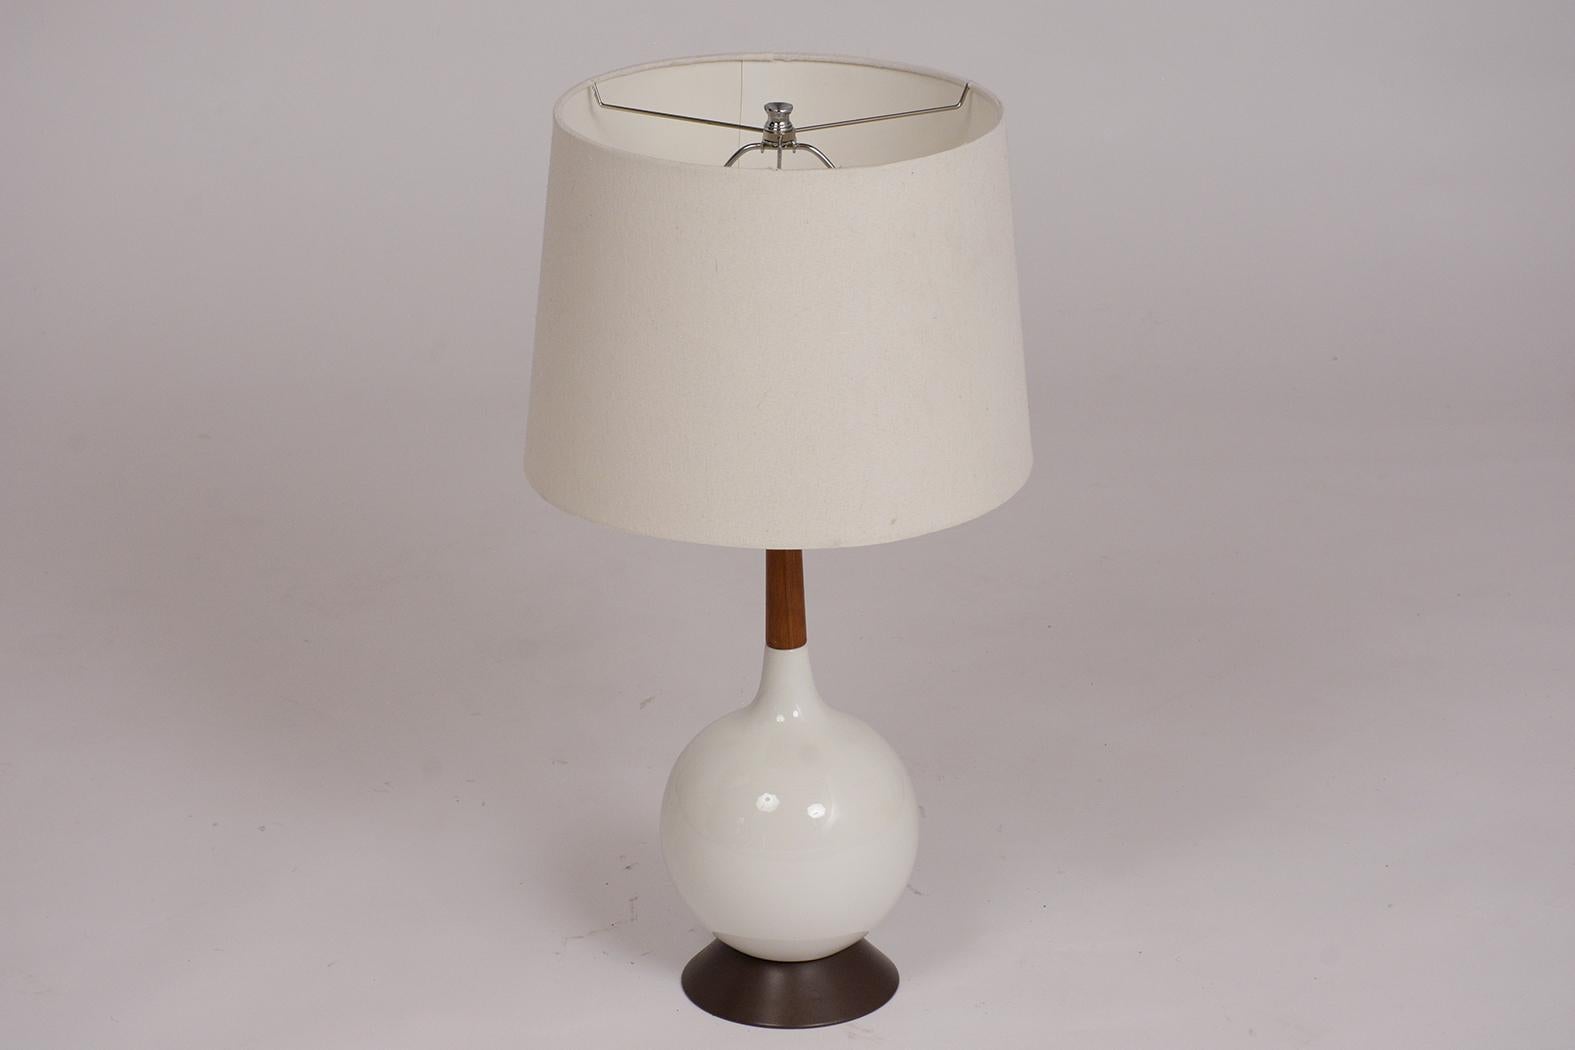 American Pair of 1960s Mid-Century Modern Ceramic Table Lamps